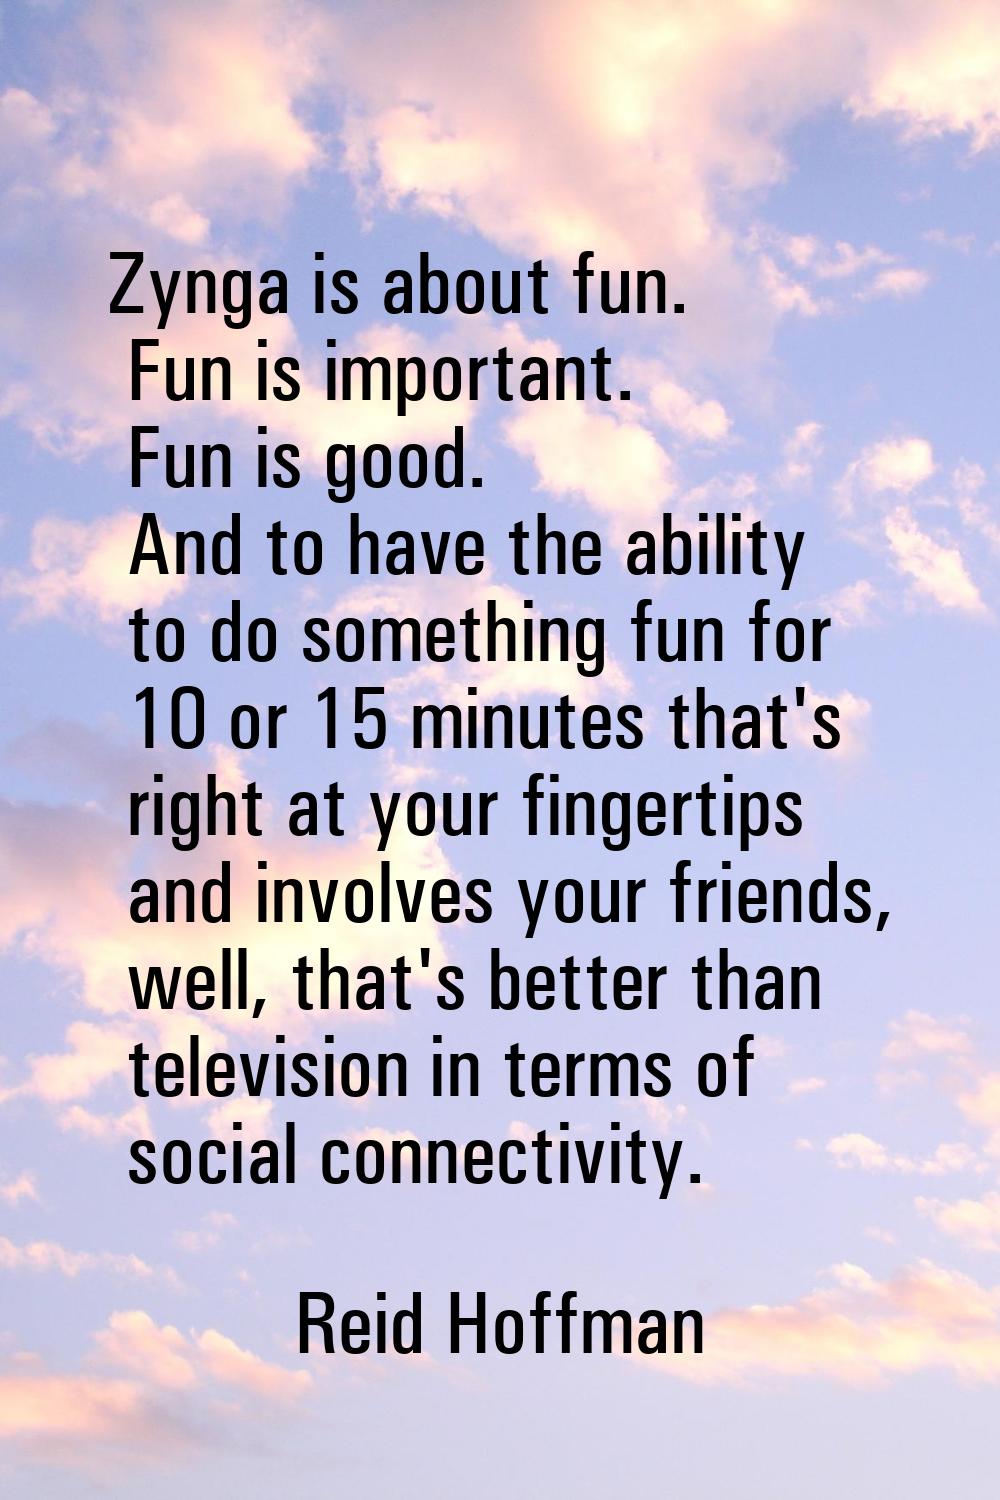 Zynga is about fun. Fun is important. Fun is good. And to have the ability to do something fun for 